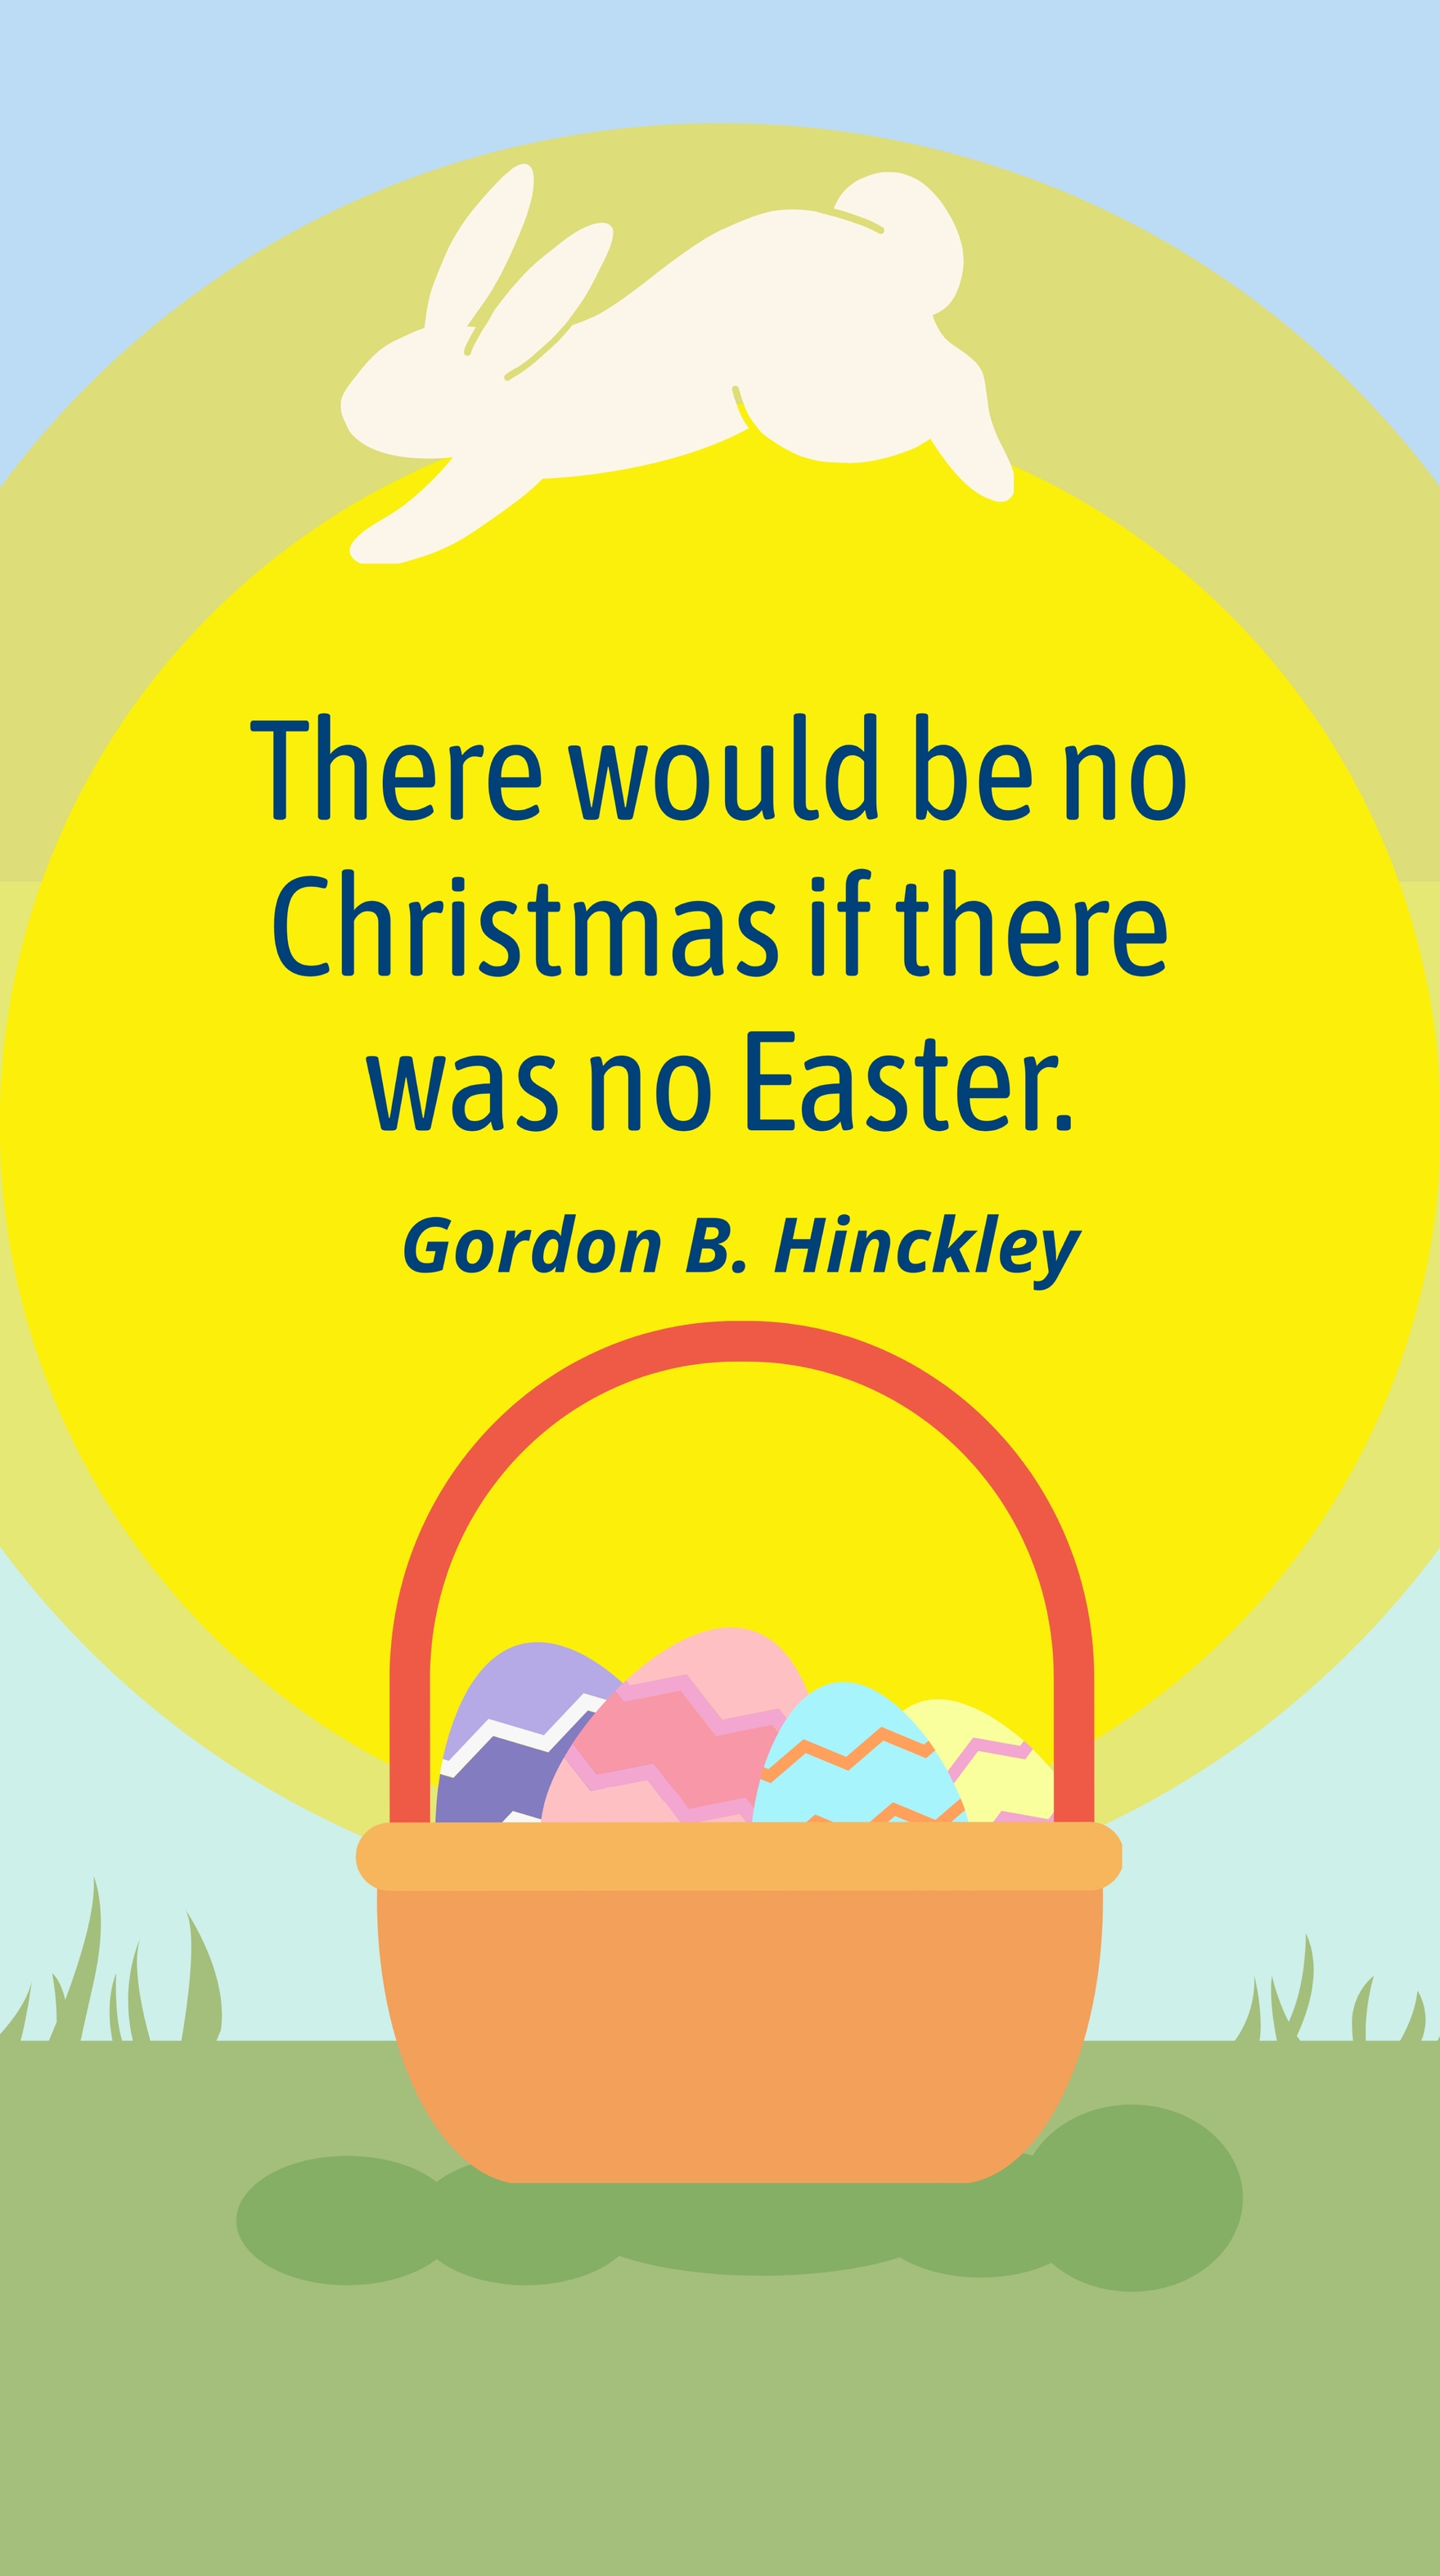 Free Gordon B. Hinckley - There would be no Christmas if there was no Easter.